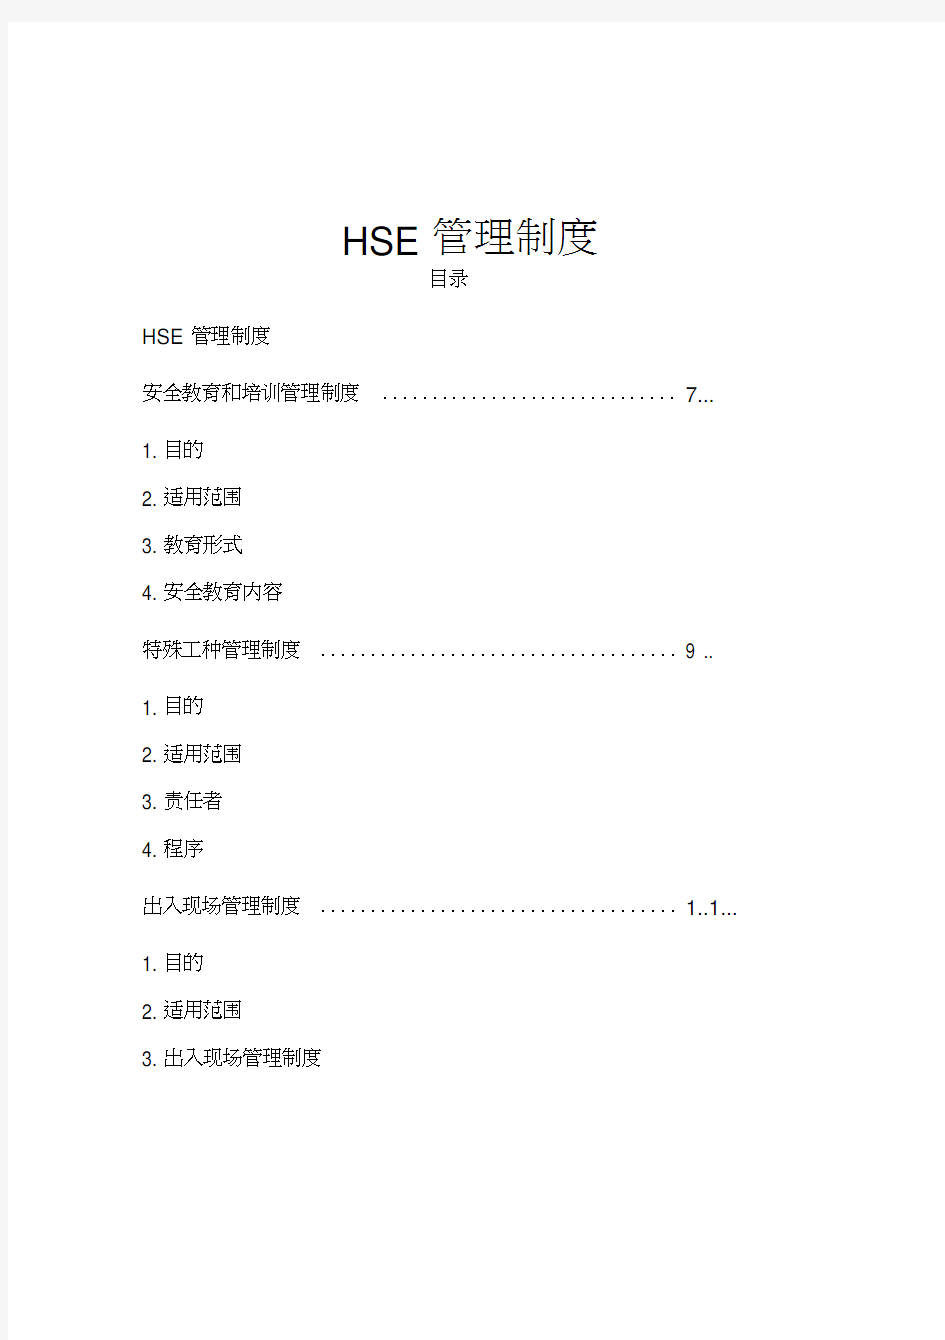 HSE管理规章制度